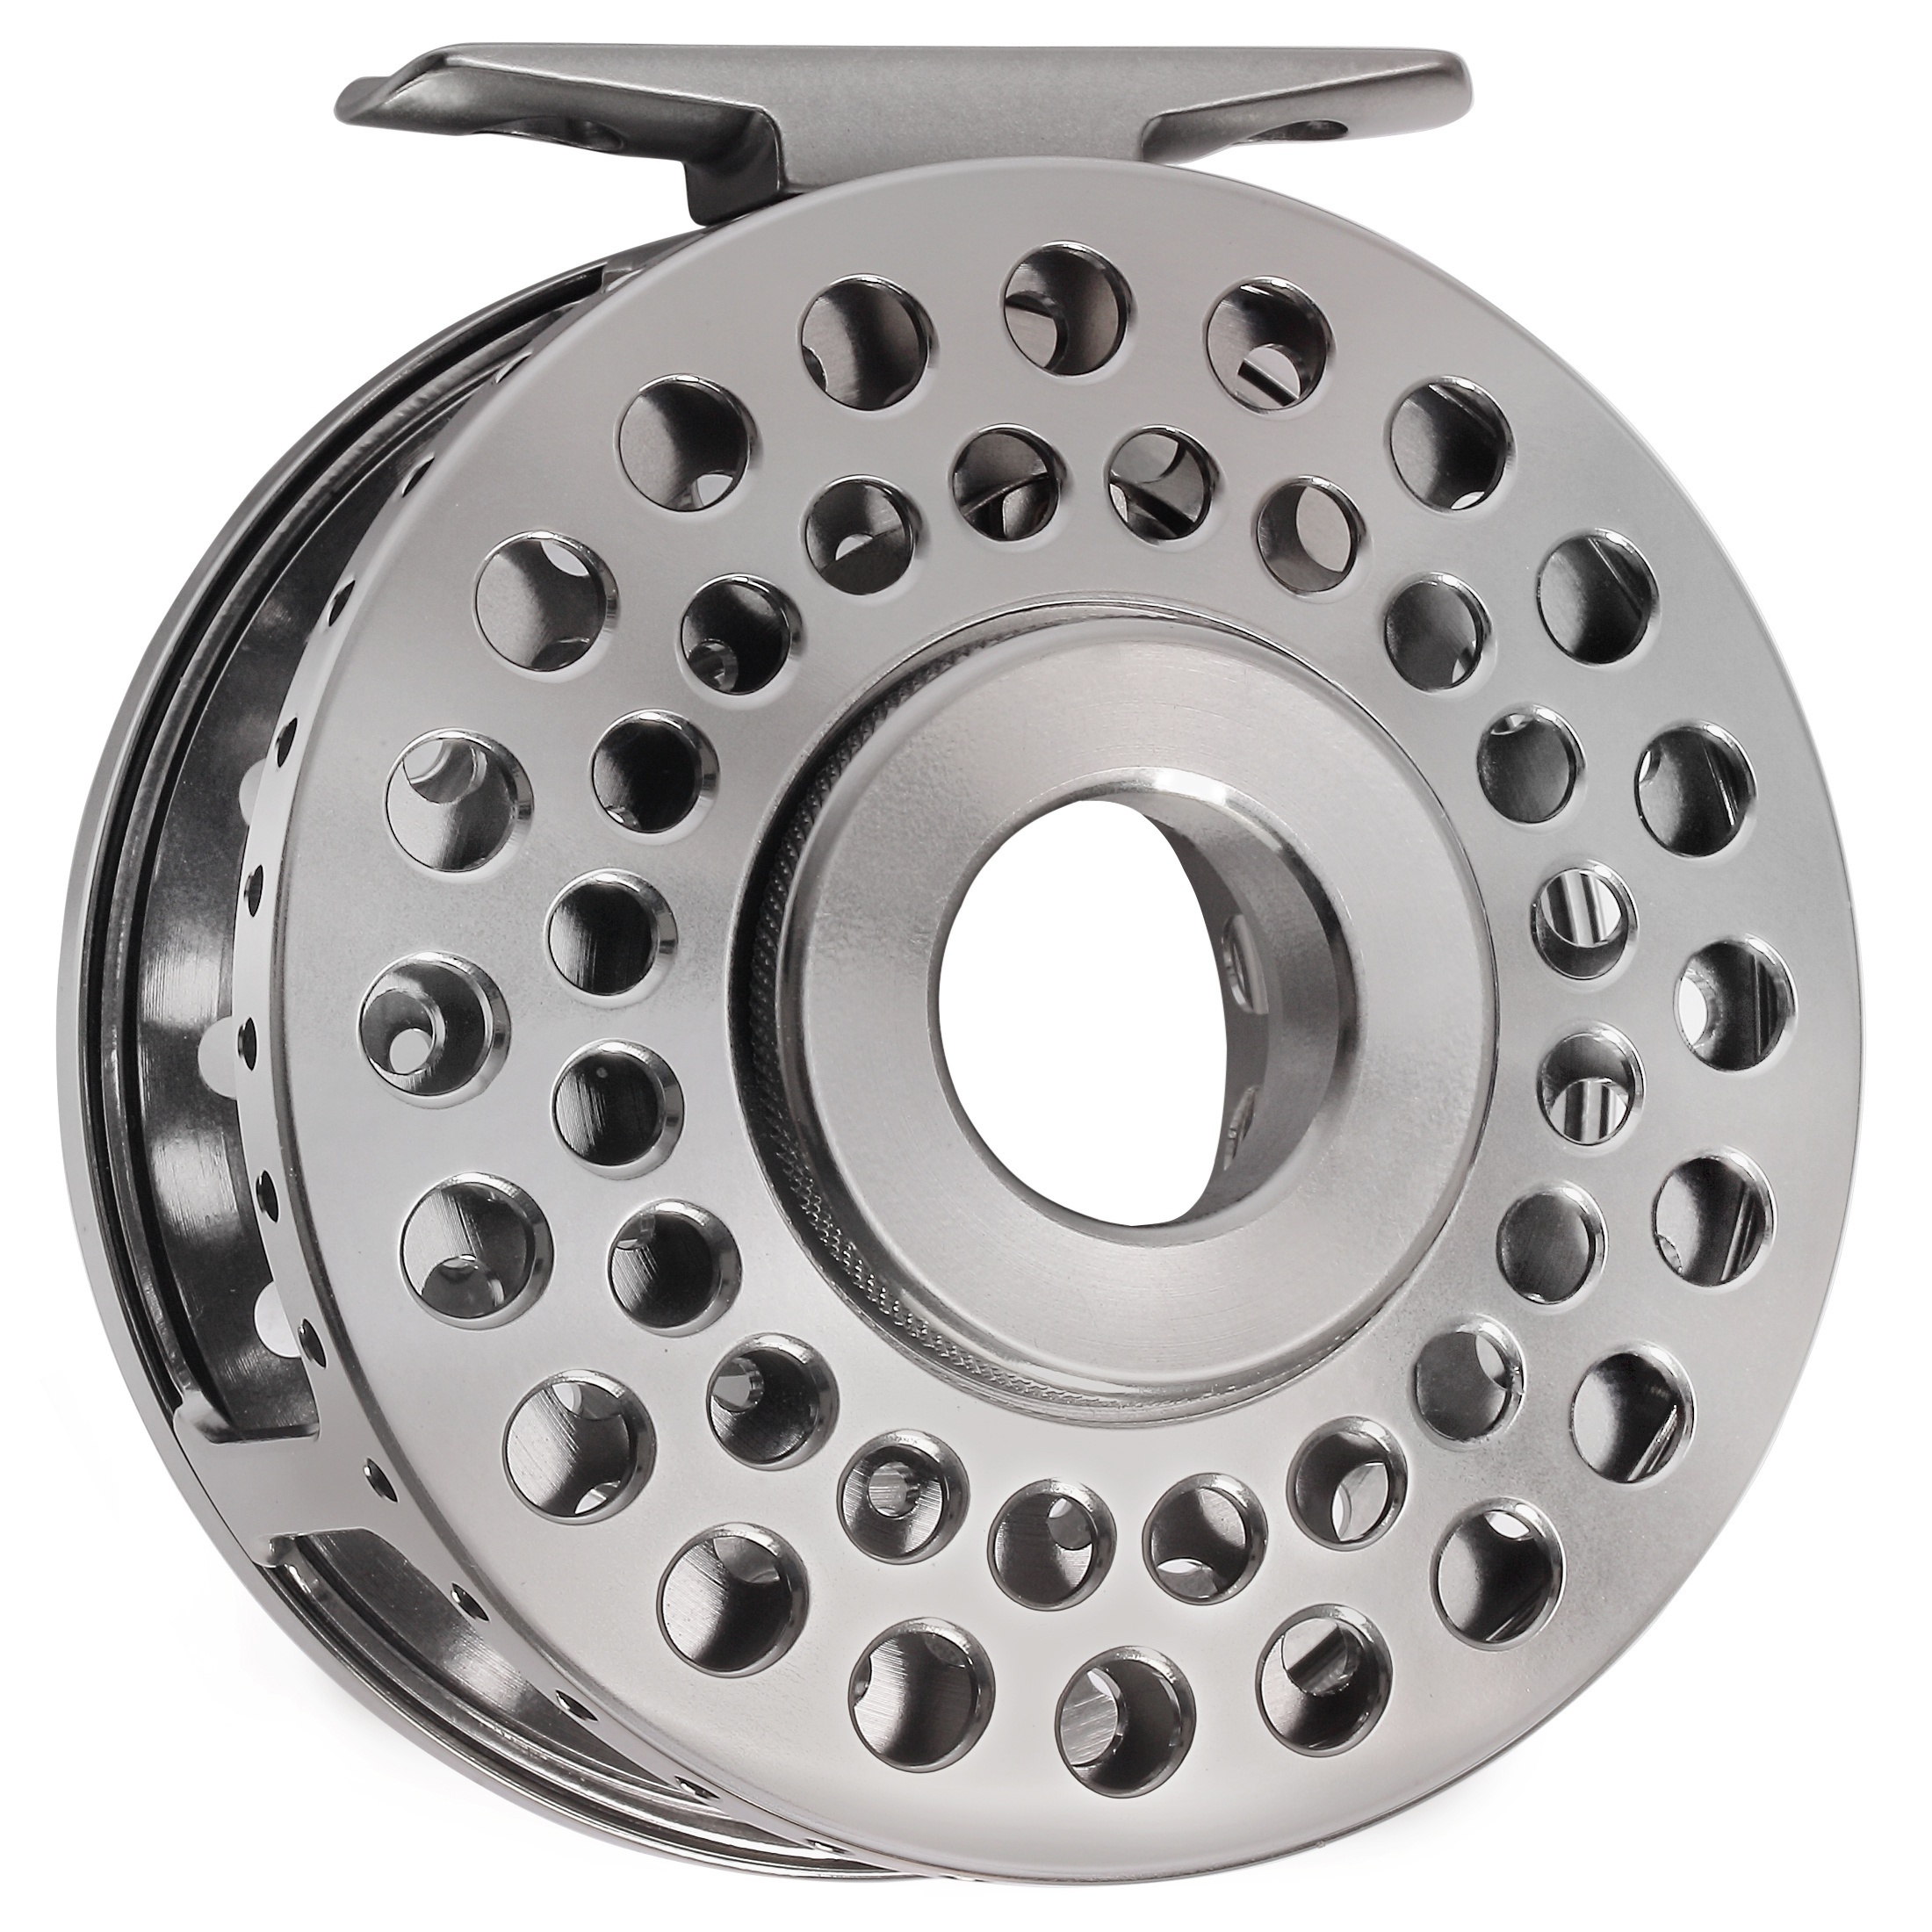 Click/pawl reels switchable?  The North American Fly Fishing